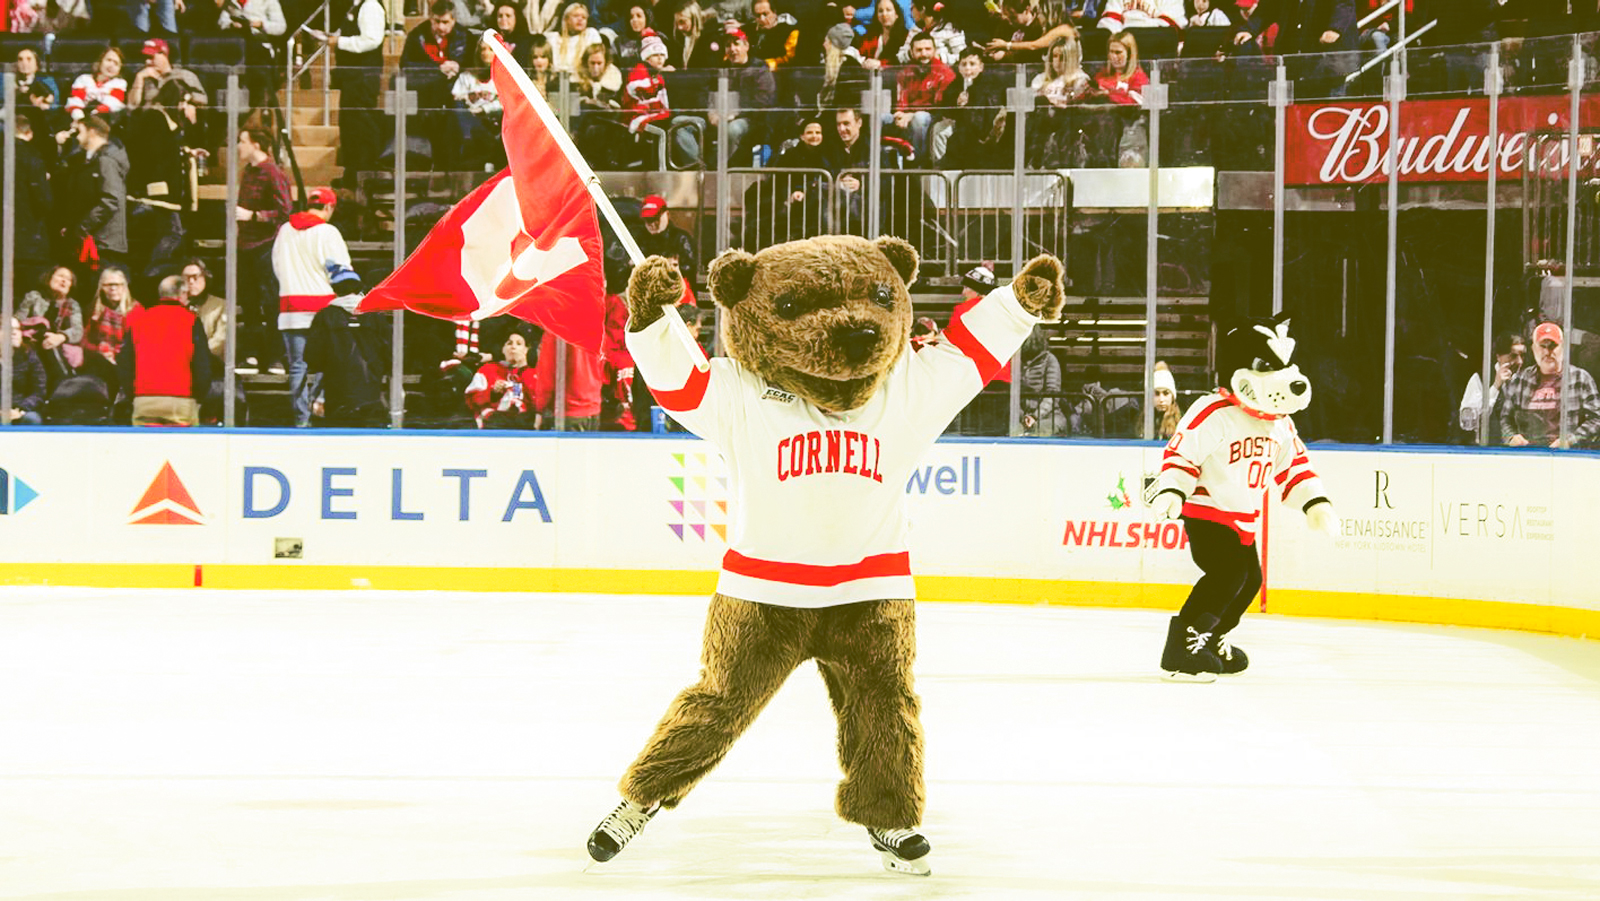 Touchdown the Big Red Bear skates during a hockey game at Lynah Rink